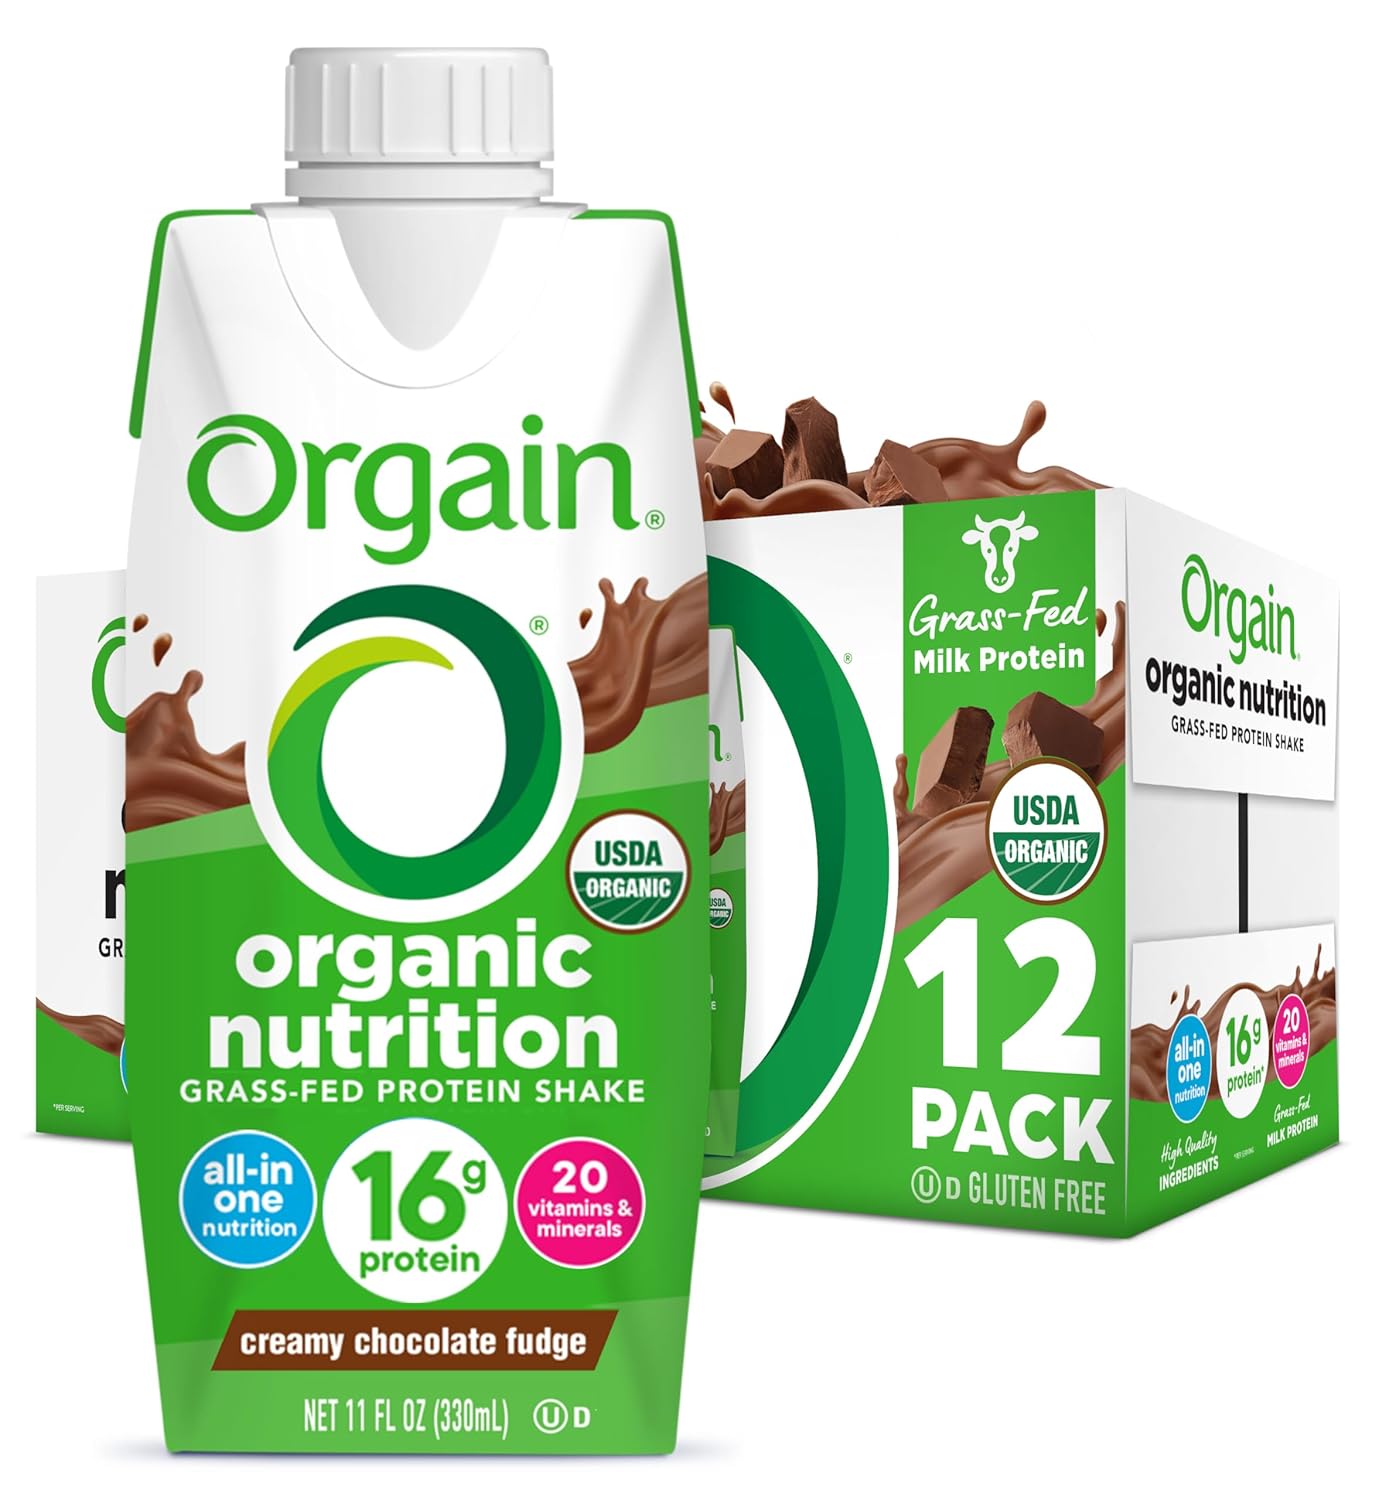 orgain organic nutritional protein shake creamy chocolate fudge 16g grass fed whey protein meal replacement 20 vitamins